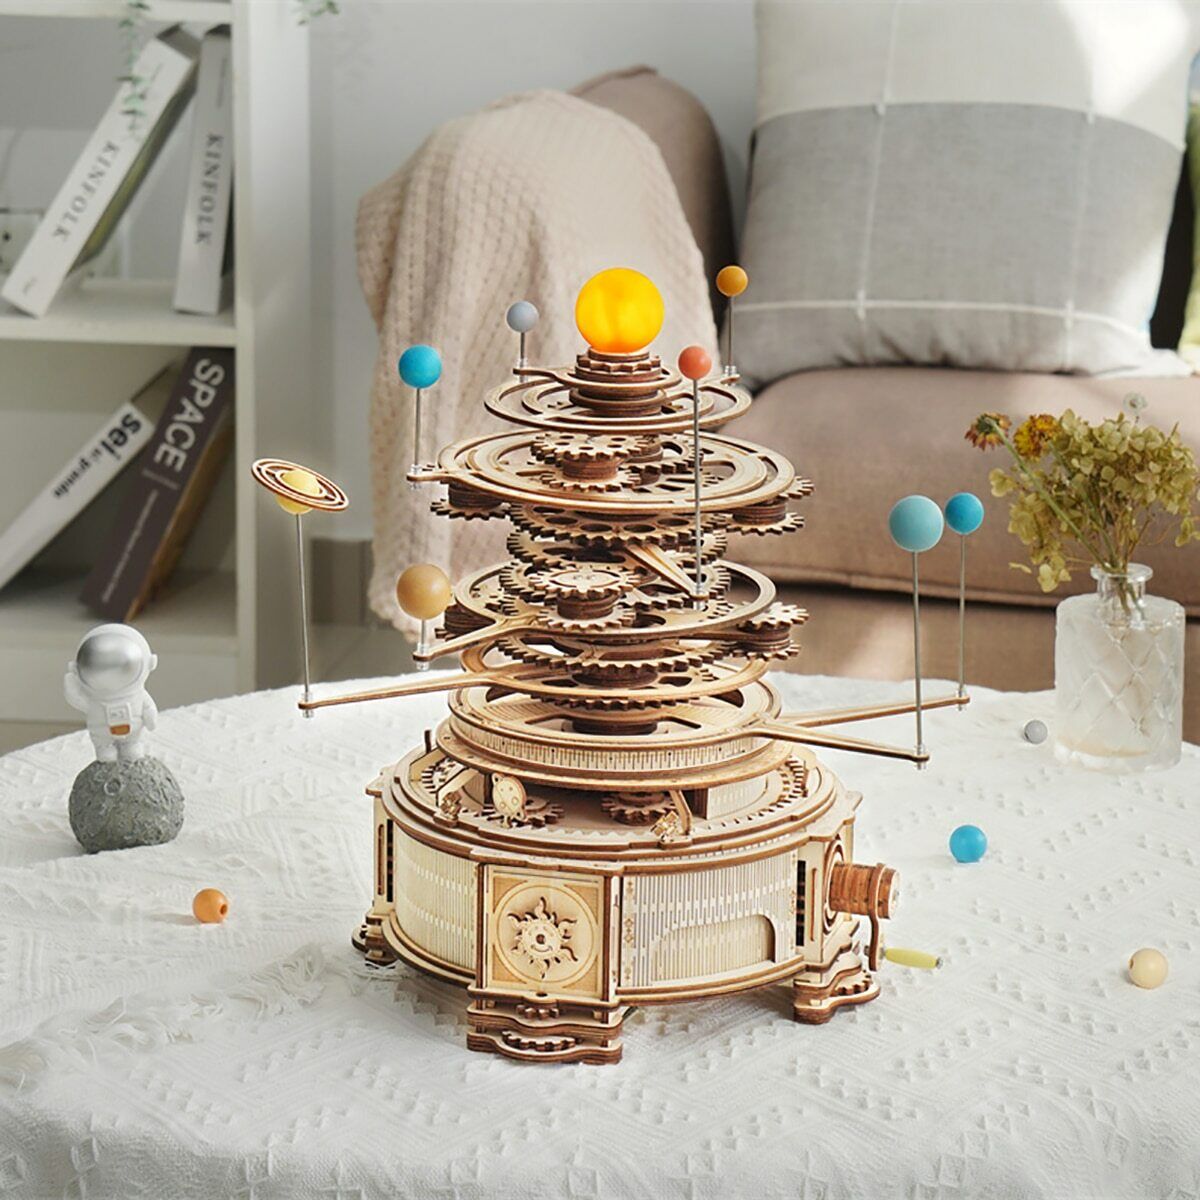 Rokr Solar System 316PCS Rotatable Orrery 3D Wooden Puzzle Assembly Toy for Gift